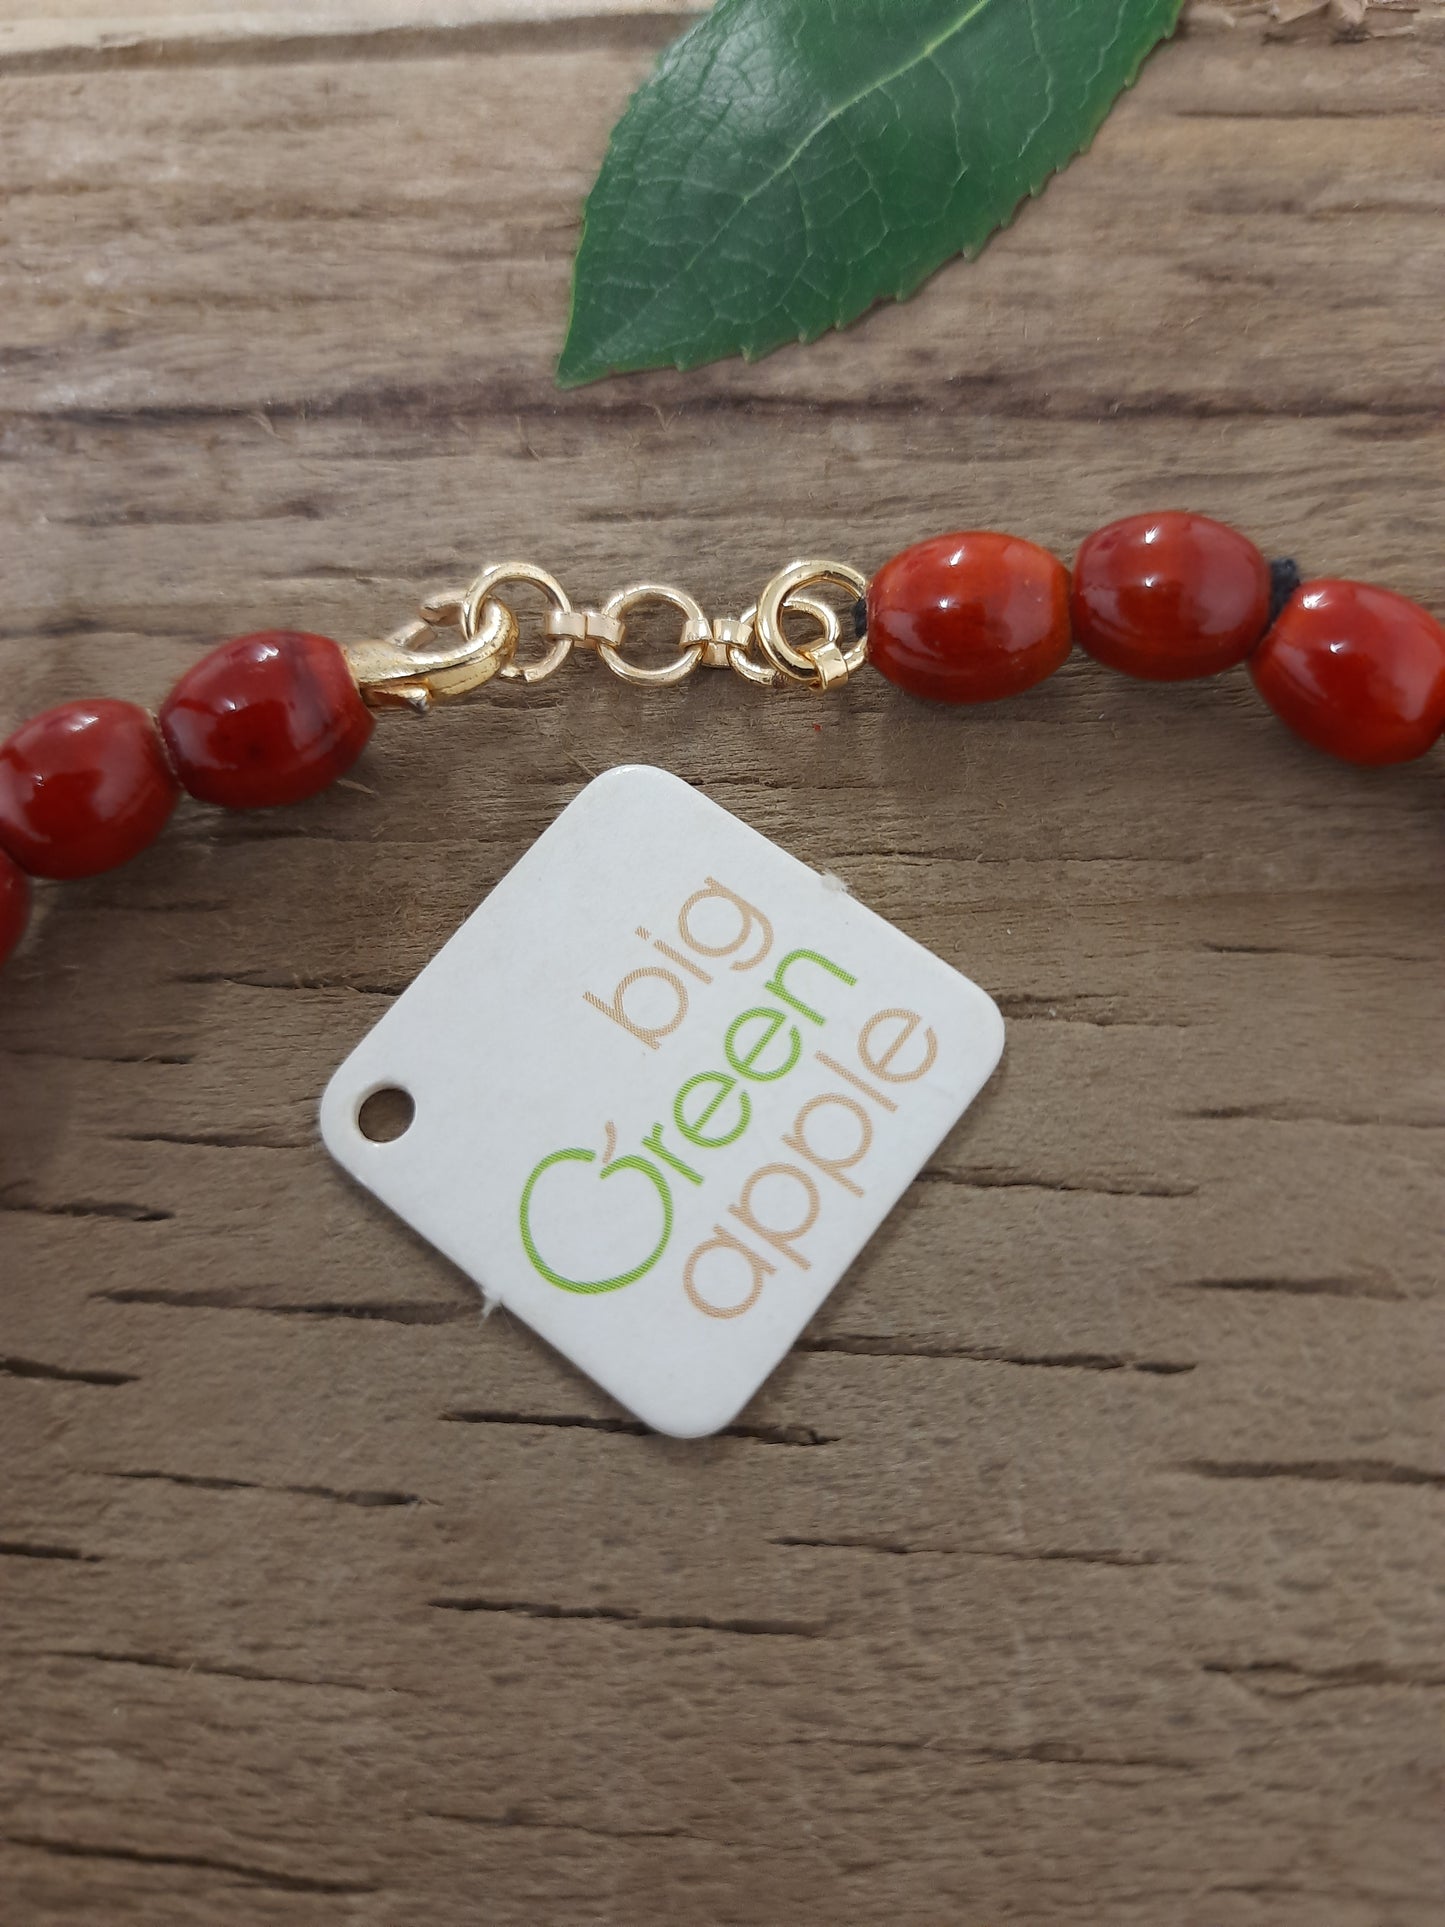 Big Green Apple, Gifts For Her, Necklace, Fair Trade Companies, Environmentally Friendly Gifts, Ecological Products